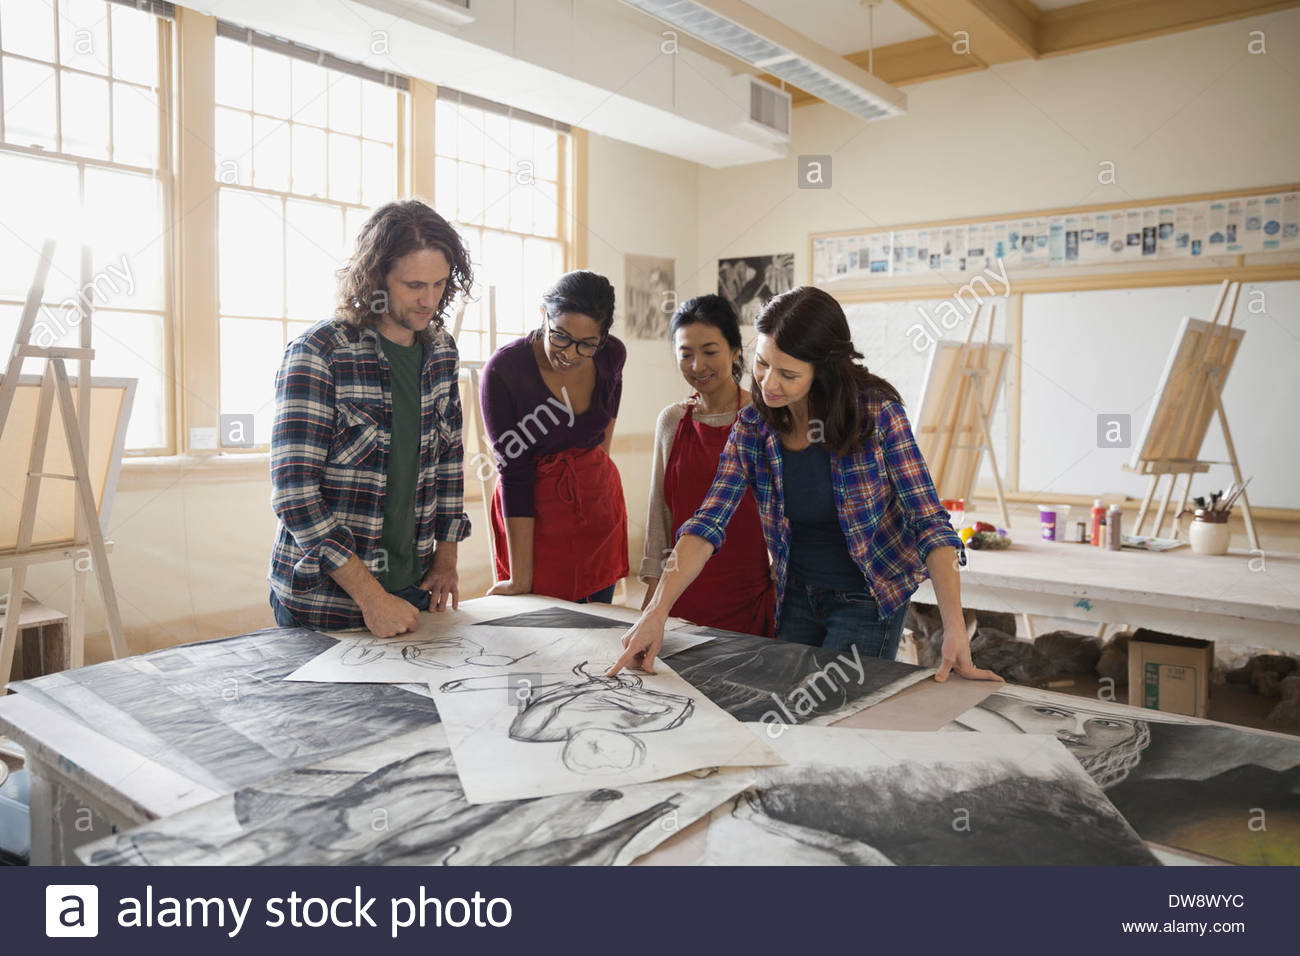 Students analyzing charcoal drawings in art class Stock Photo